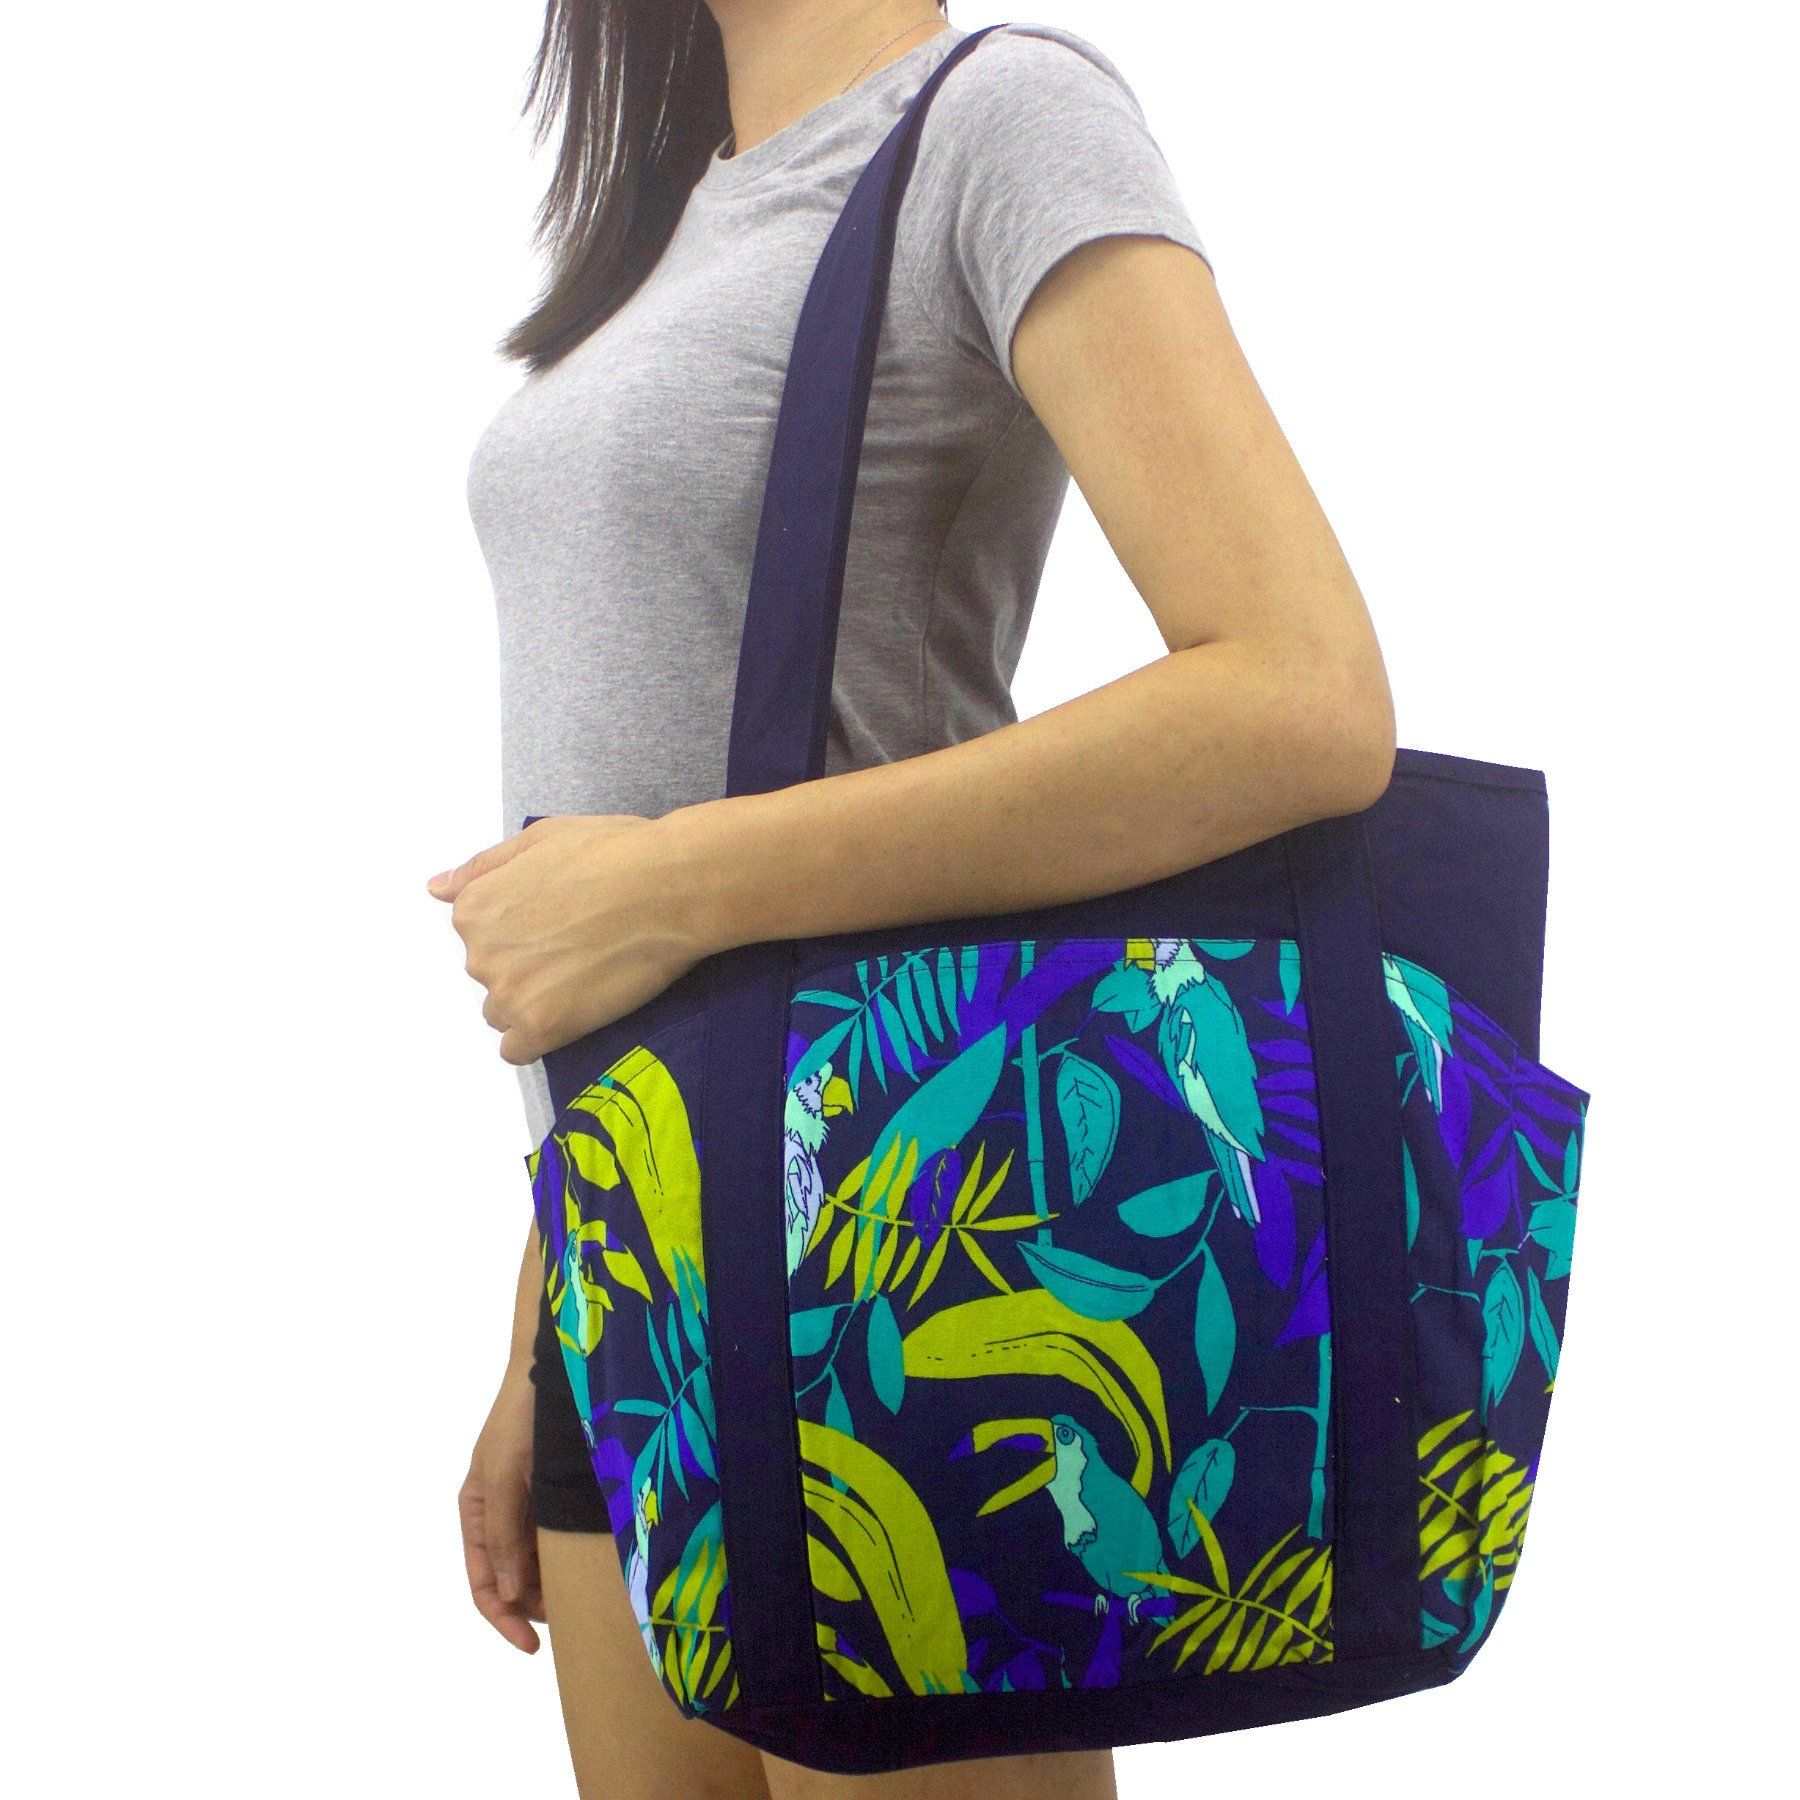 Pop this colorful tote over your shoulder and you'll be instantly channeling your inner cool chick vibes and it's not only because the bag is literally covered in a parrot and toucan print but mostly because you'll look so cool in it! You'll be amazed at how much you can fit into our classic weekend tote.